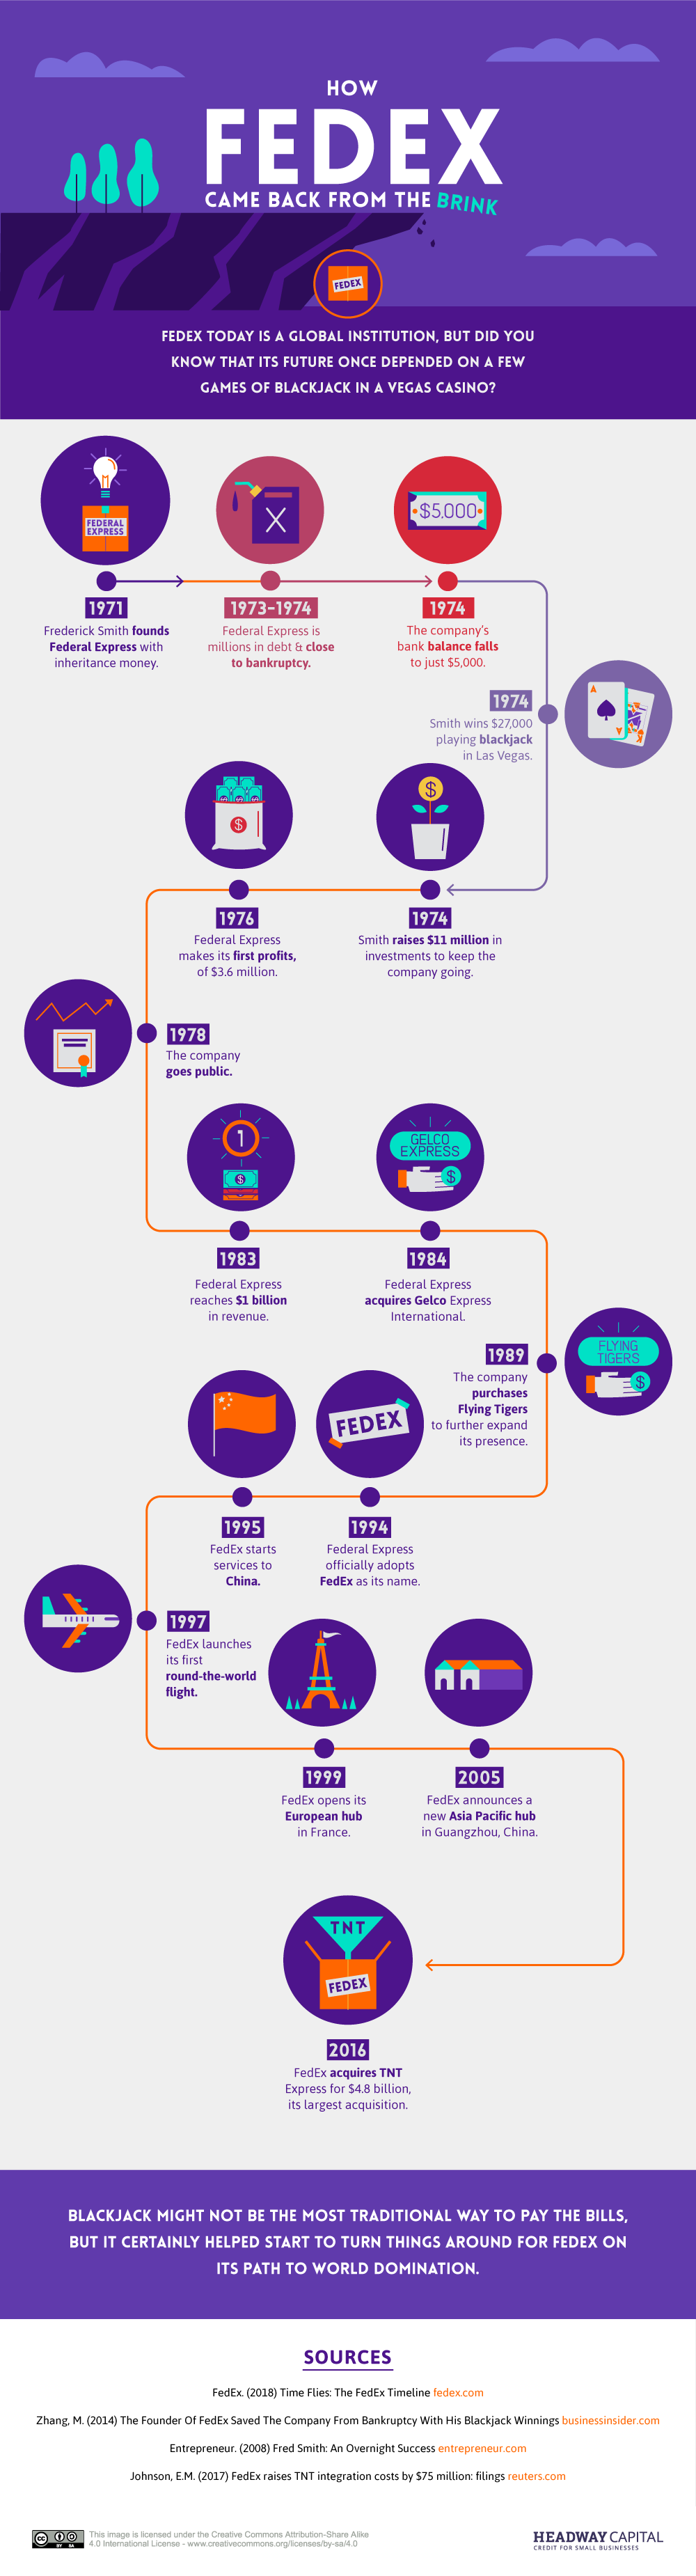 How FedEx came back from the brink [INFOGRAPHIC]